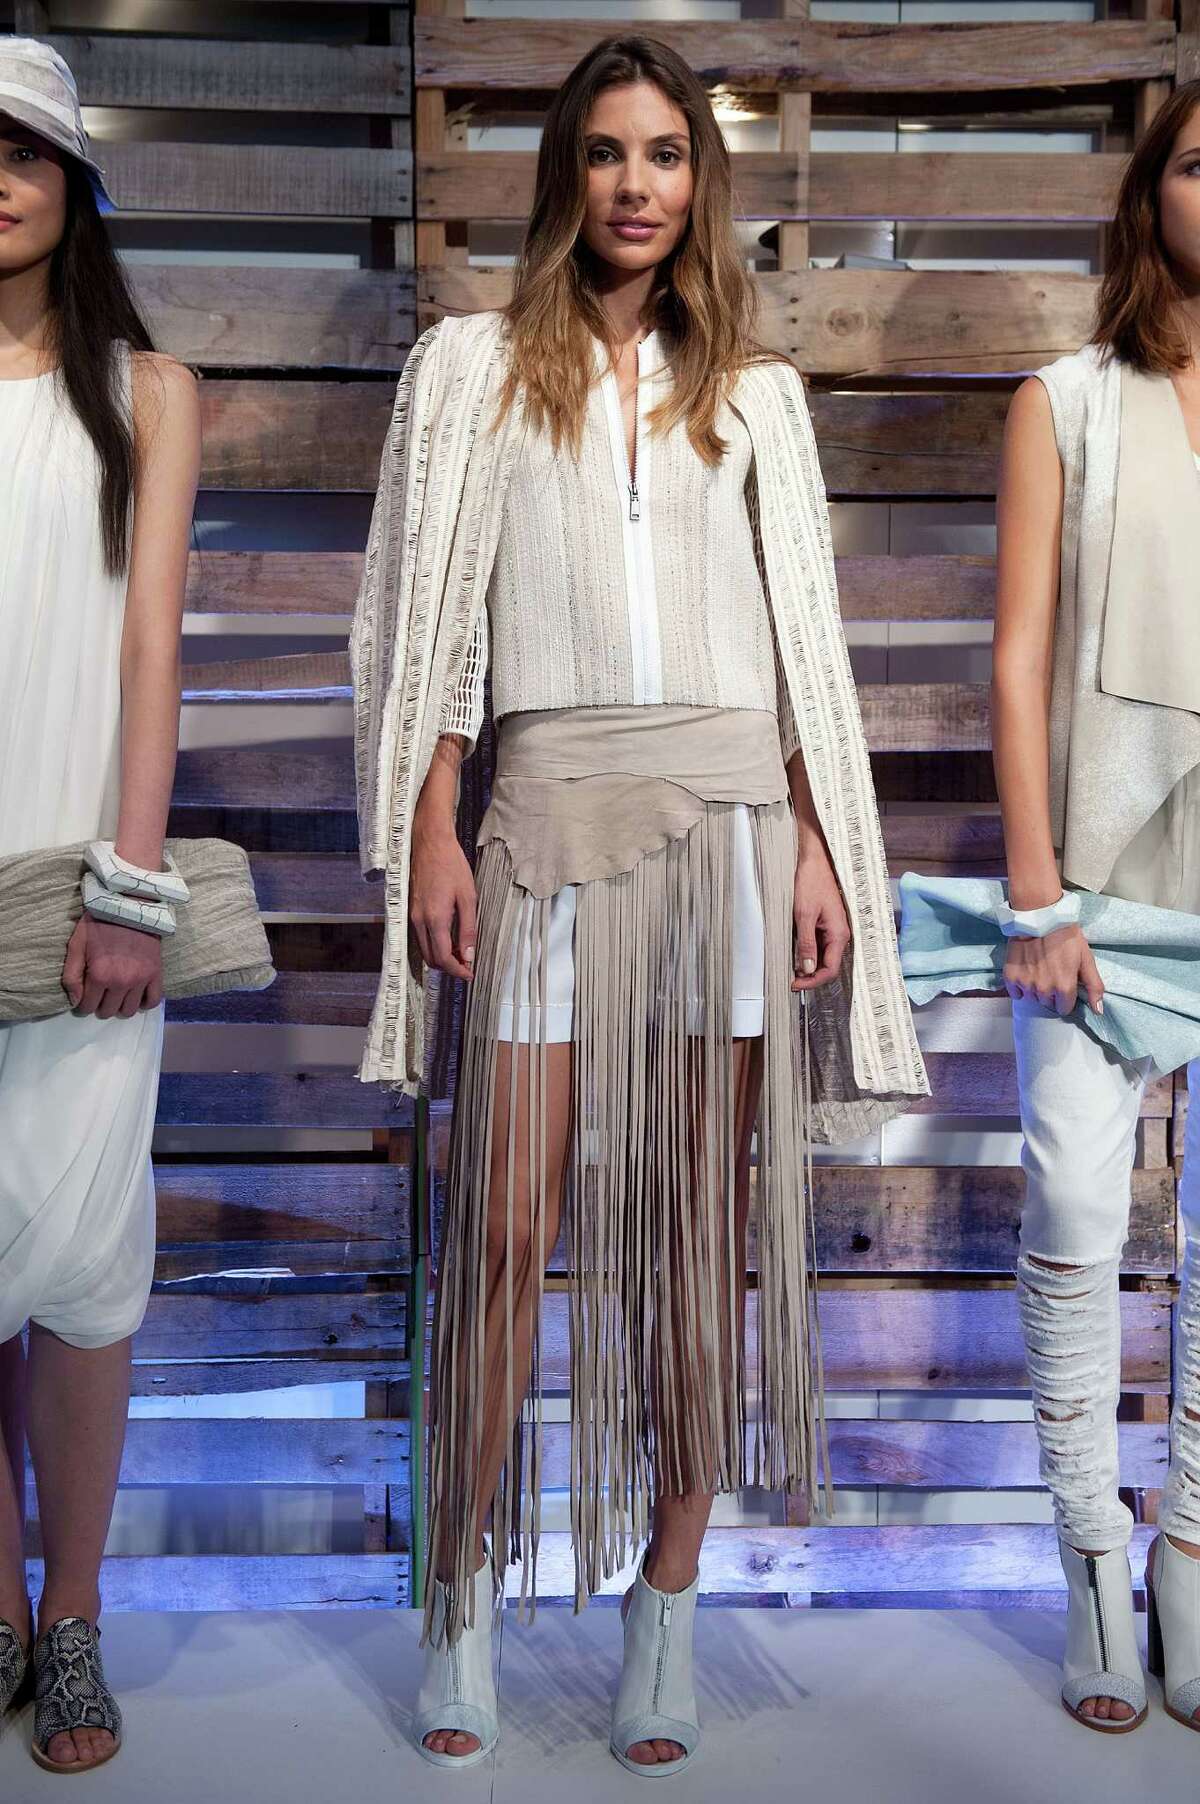 Fringe on a variety of garments and accessories will be trending for spring 2015 trend as seen in this look from Elie Tahari.